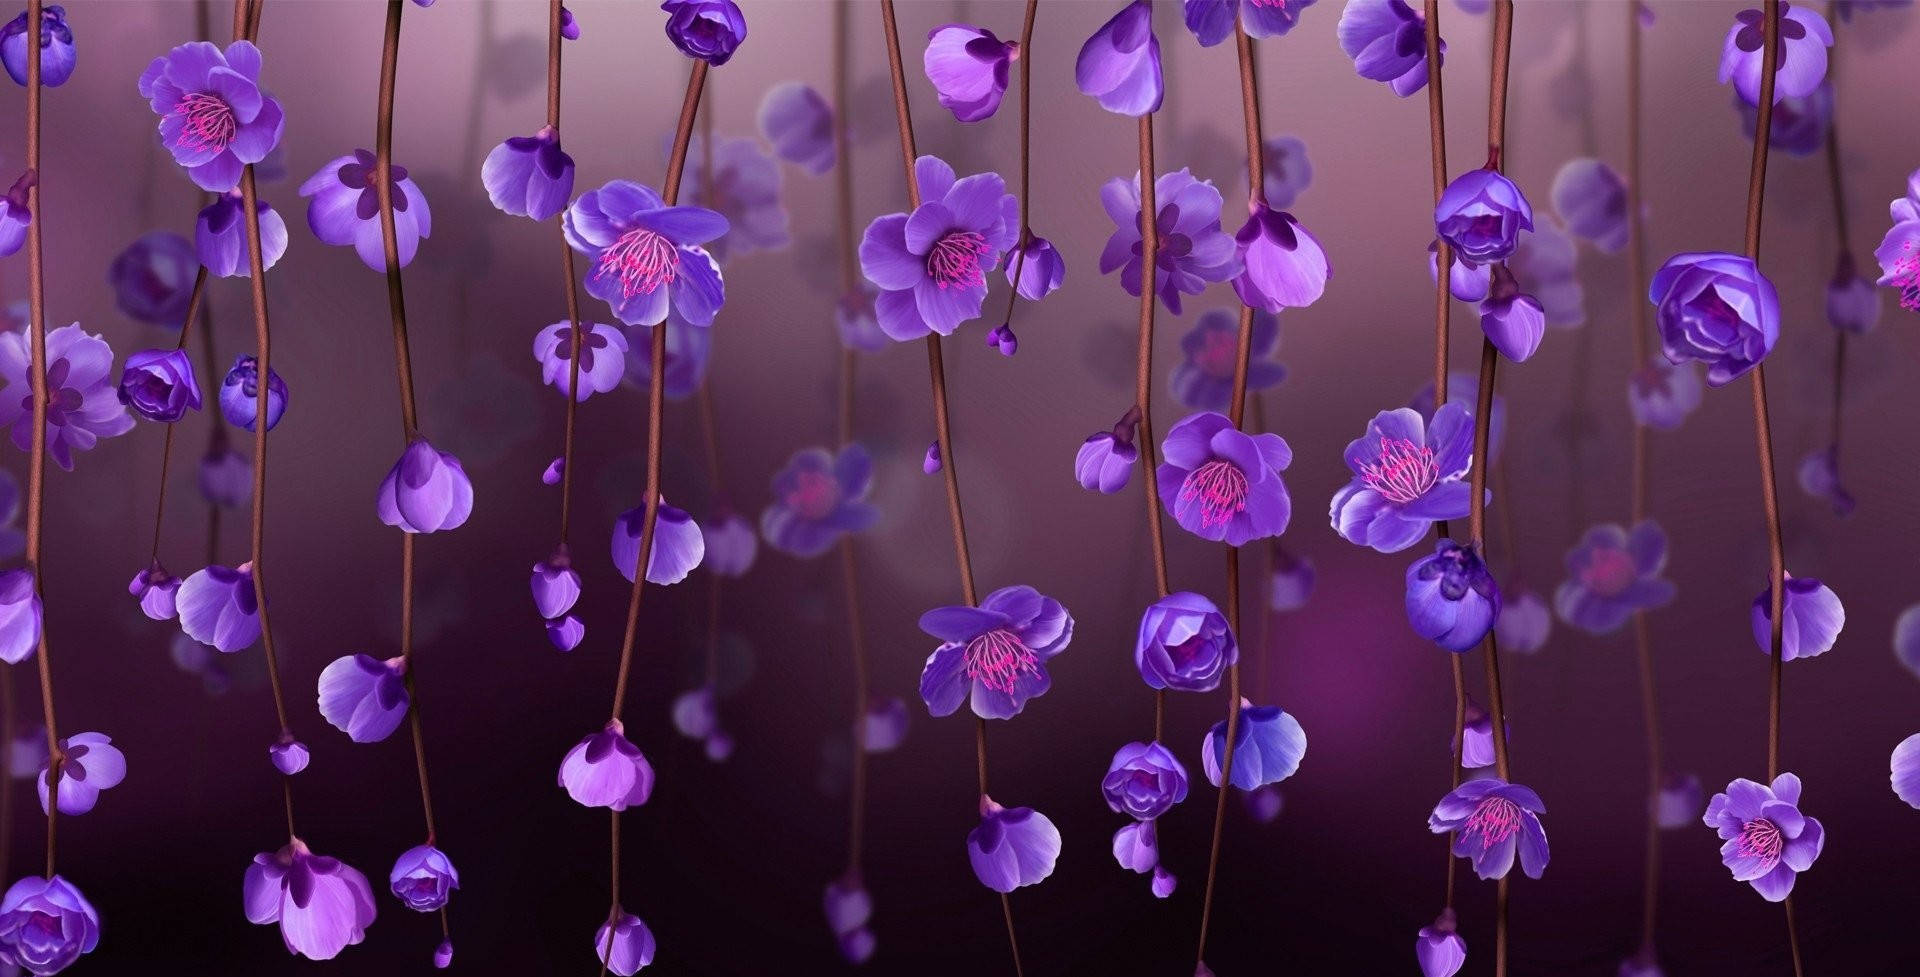 Beautiful Purple Flower in shades of magenta, violet and lavender with a blurred background Wallpaper